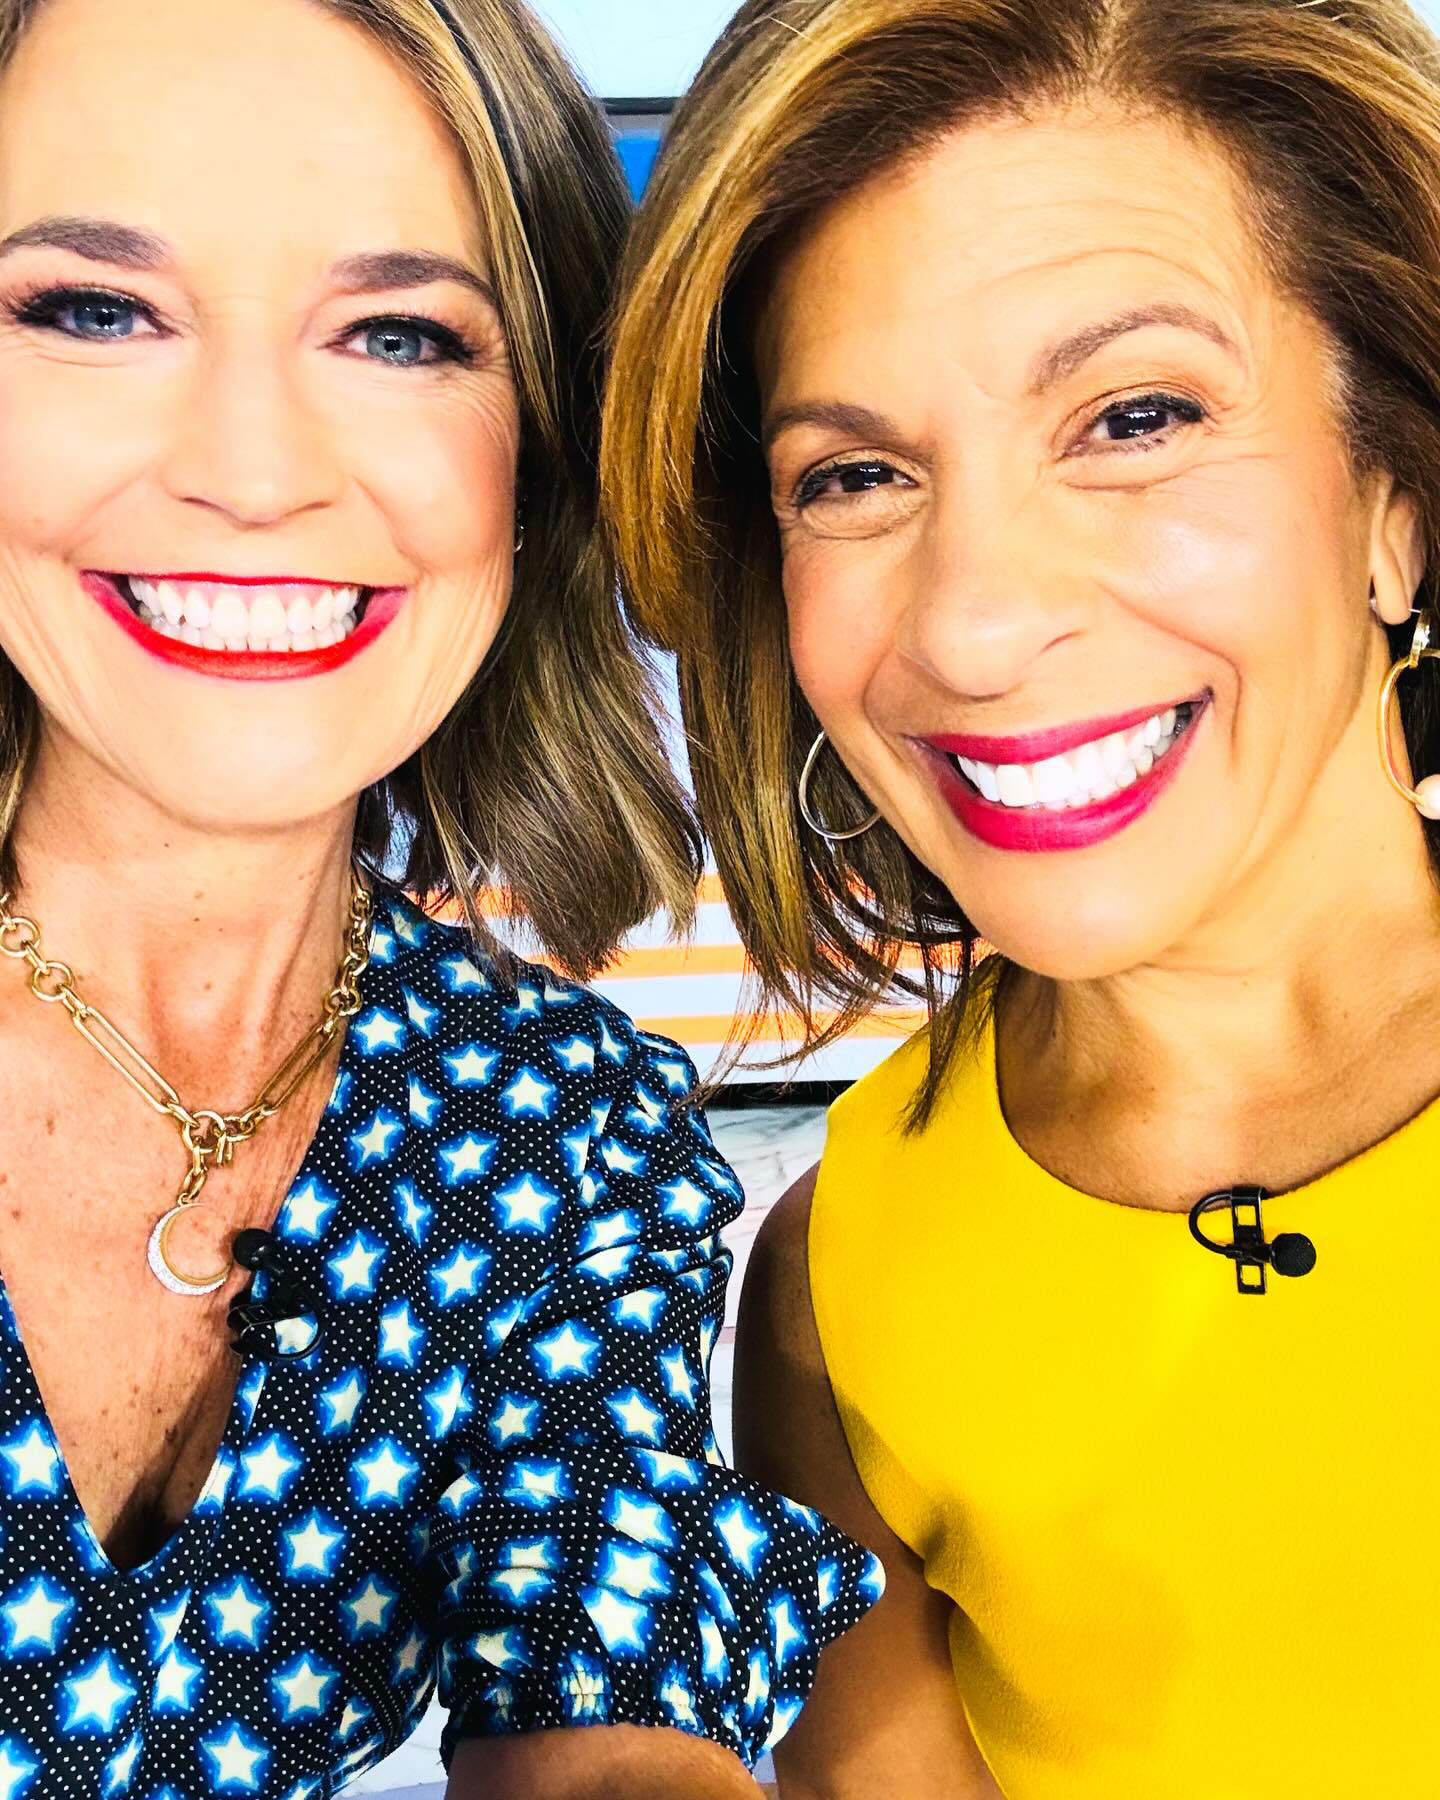 How Todays Savannah Guthrie and Hoda Kotb Are Celebrating the Eclipse